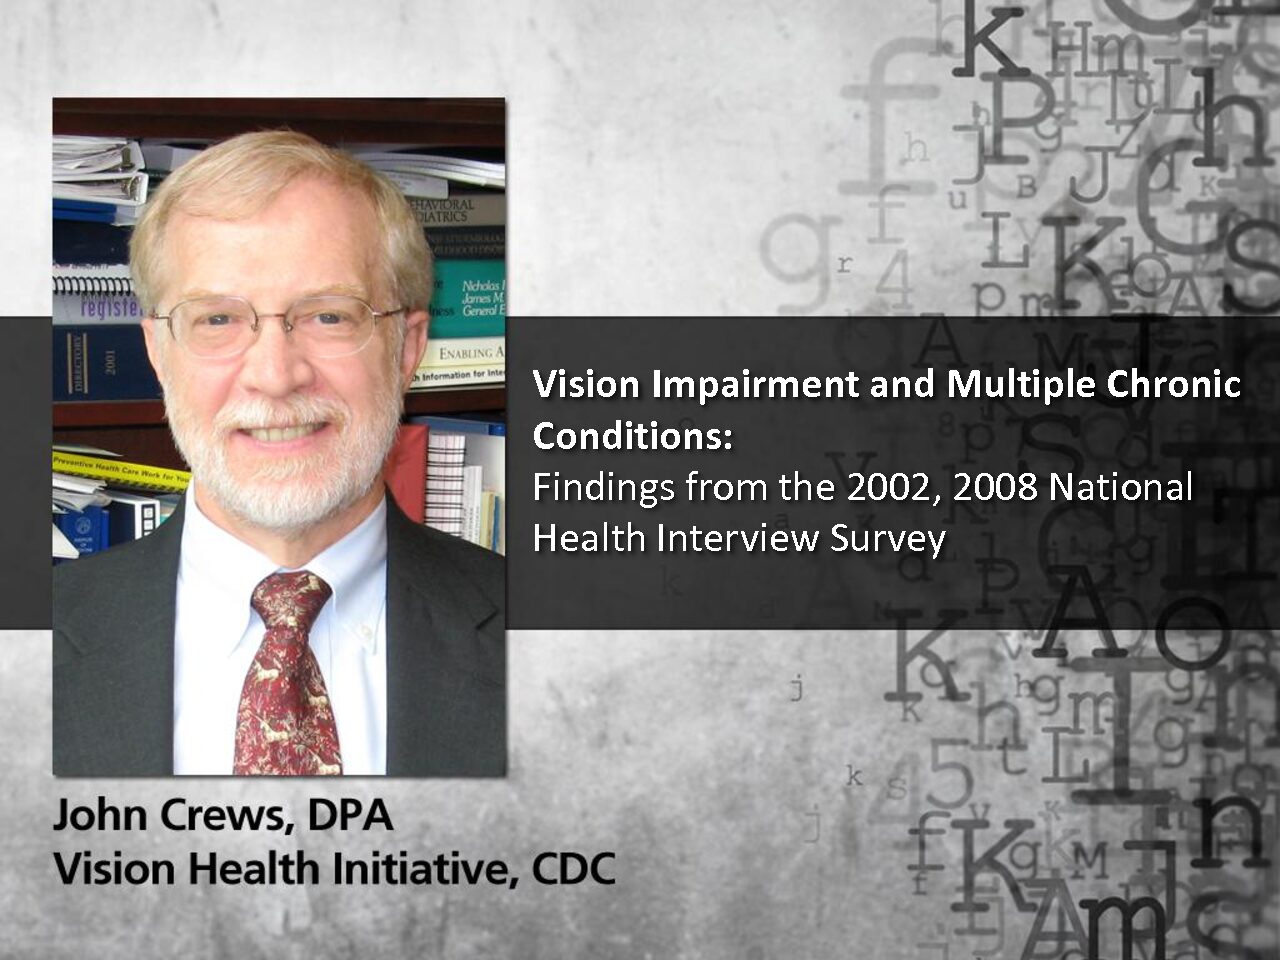 Vision Impairment and Multiple Chronic Conditions: Findings from the 2002, 2008 National Health Interview Survey